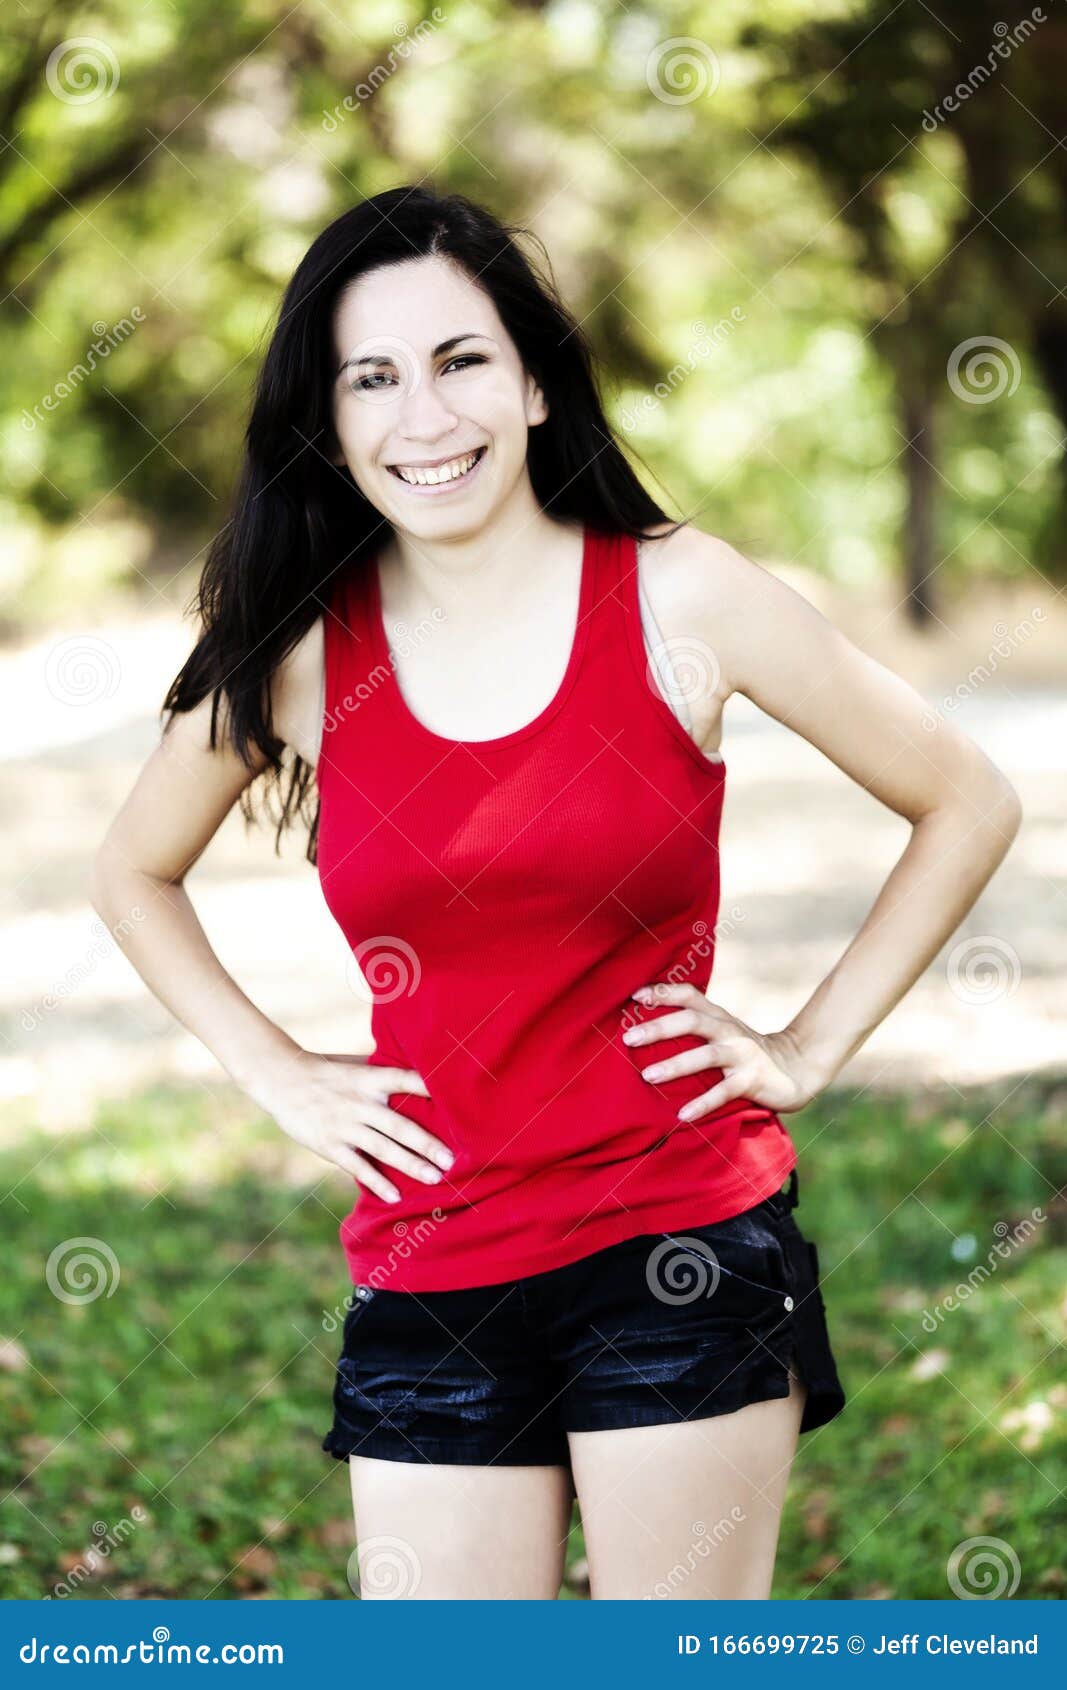 Smiling Hispanic Teen Woman Outdoors Red Top And Shorts